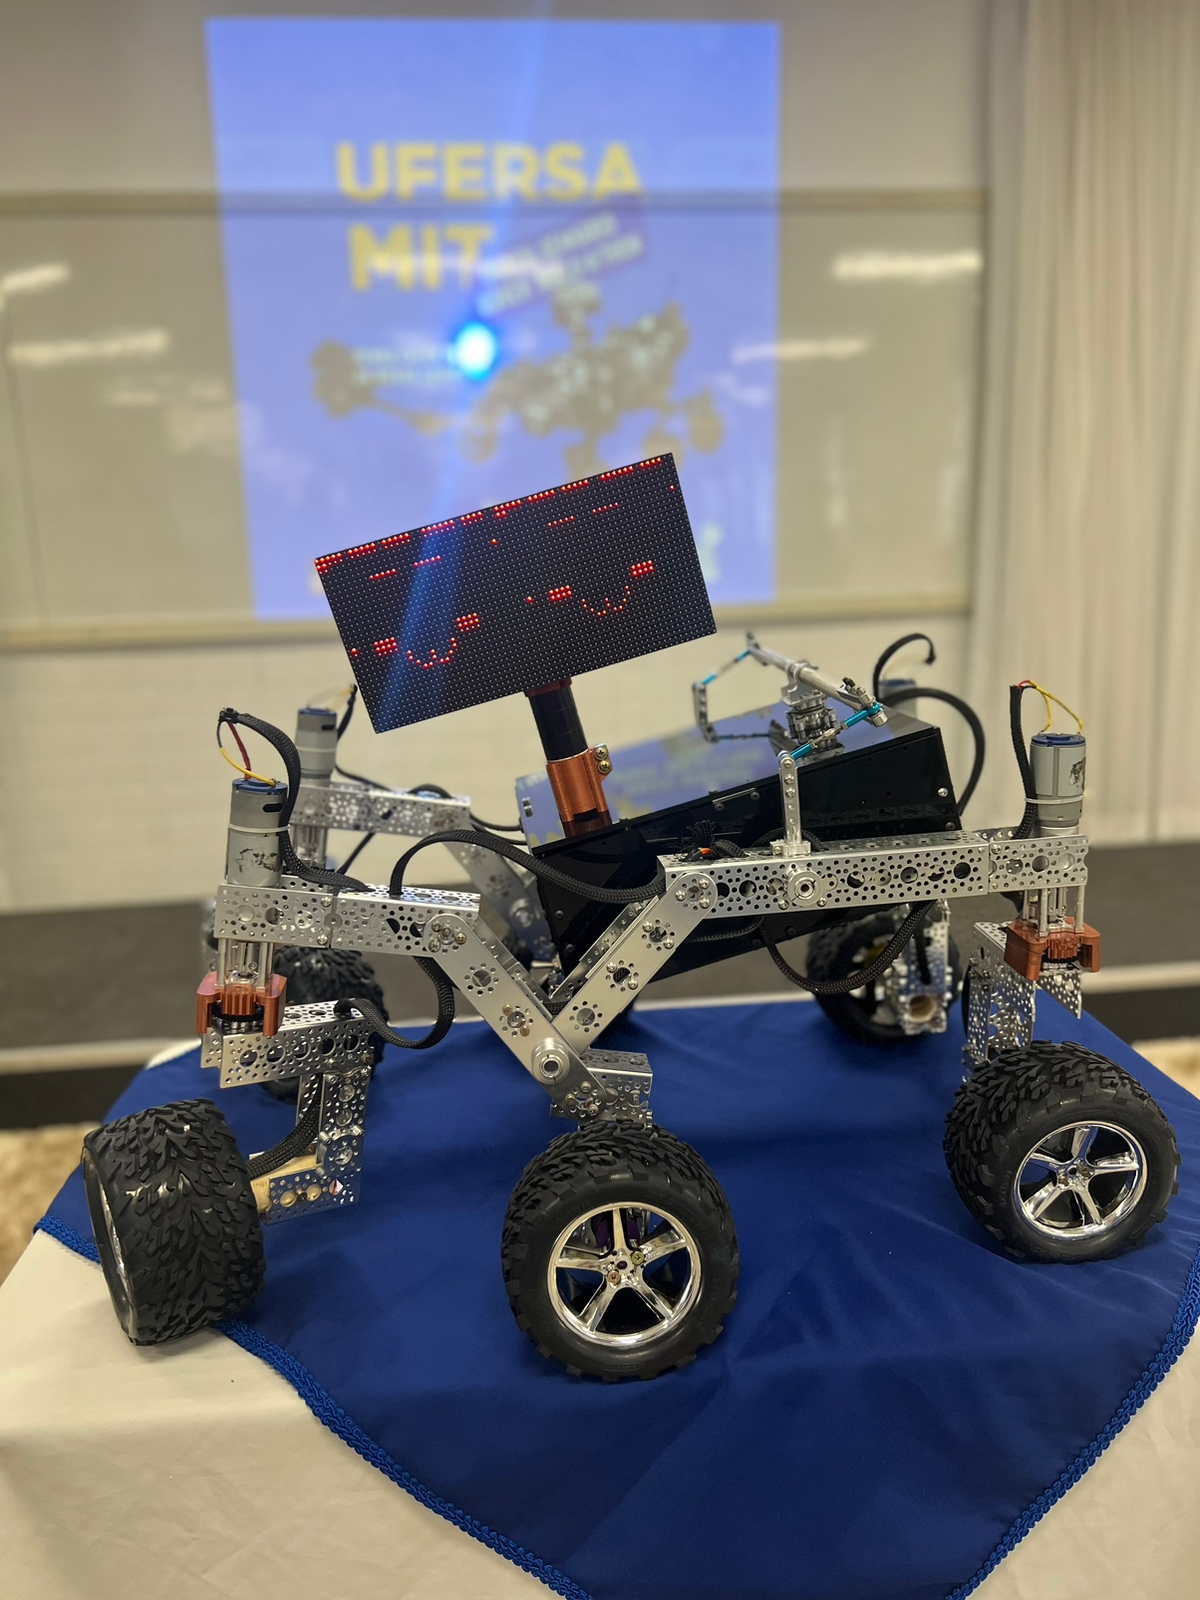 A open source rover on a table with 6 wheels and a lined metal body with a rectangular screen that has two smiley faces